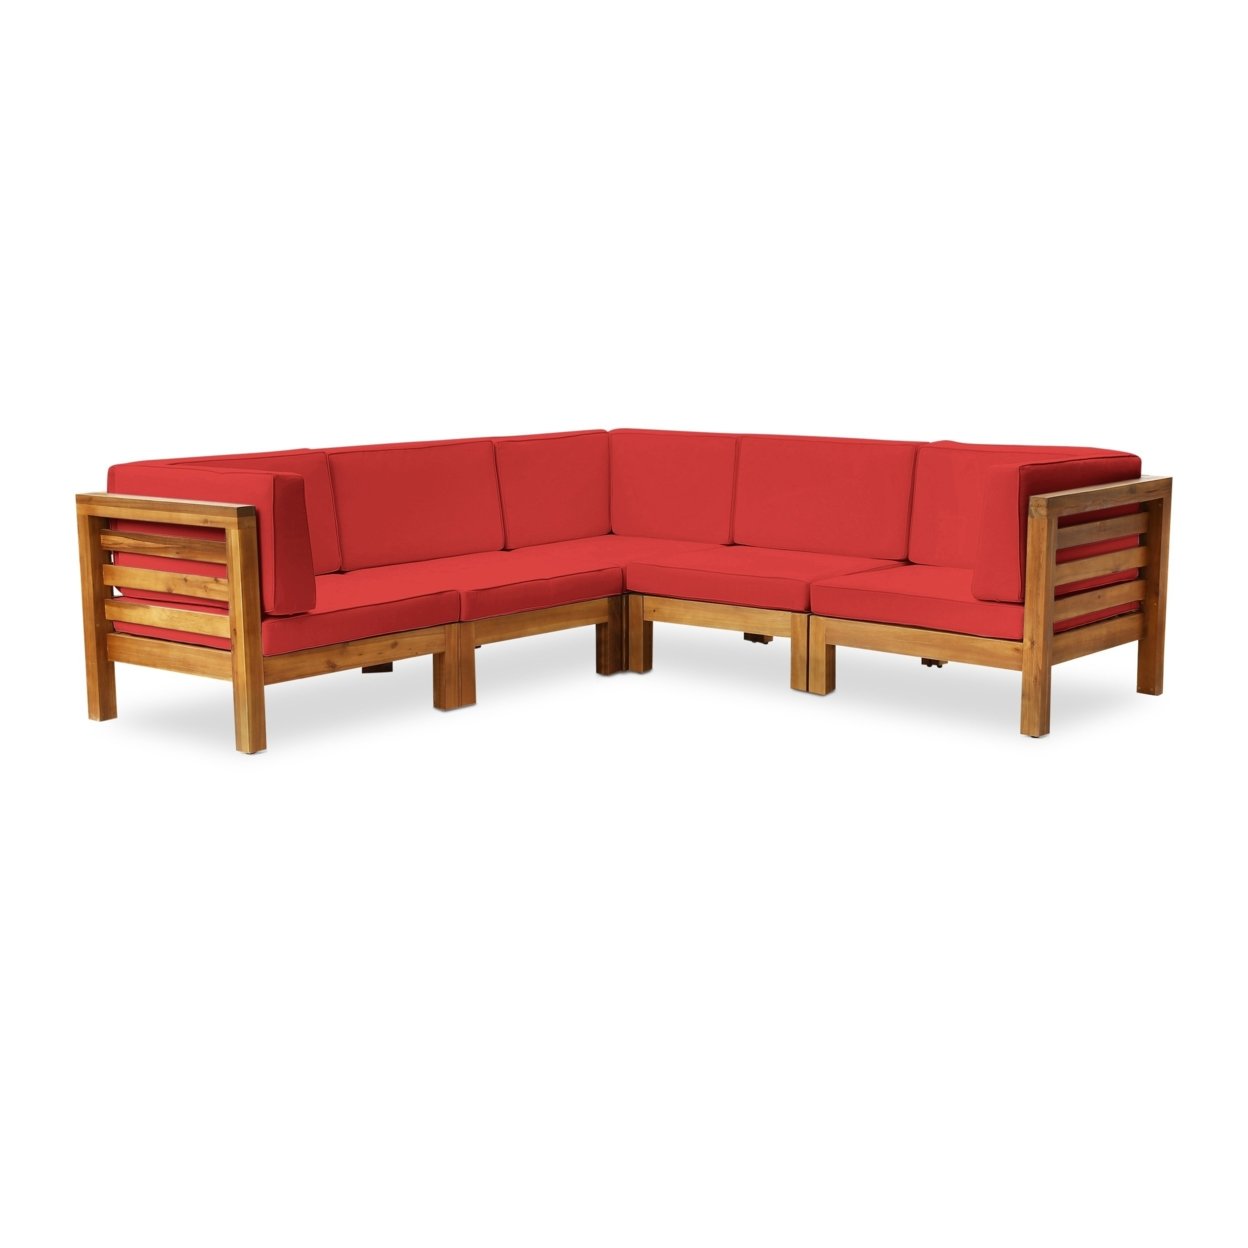 Dawson Outdoor V-Shaped Sectional Sofa Set - 5-Seater - Acacia Wood - Outdoor Cushions - Red, Teak